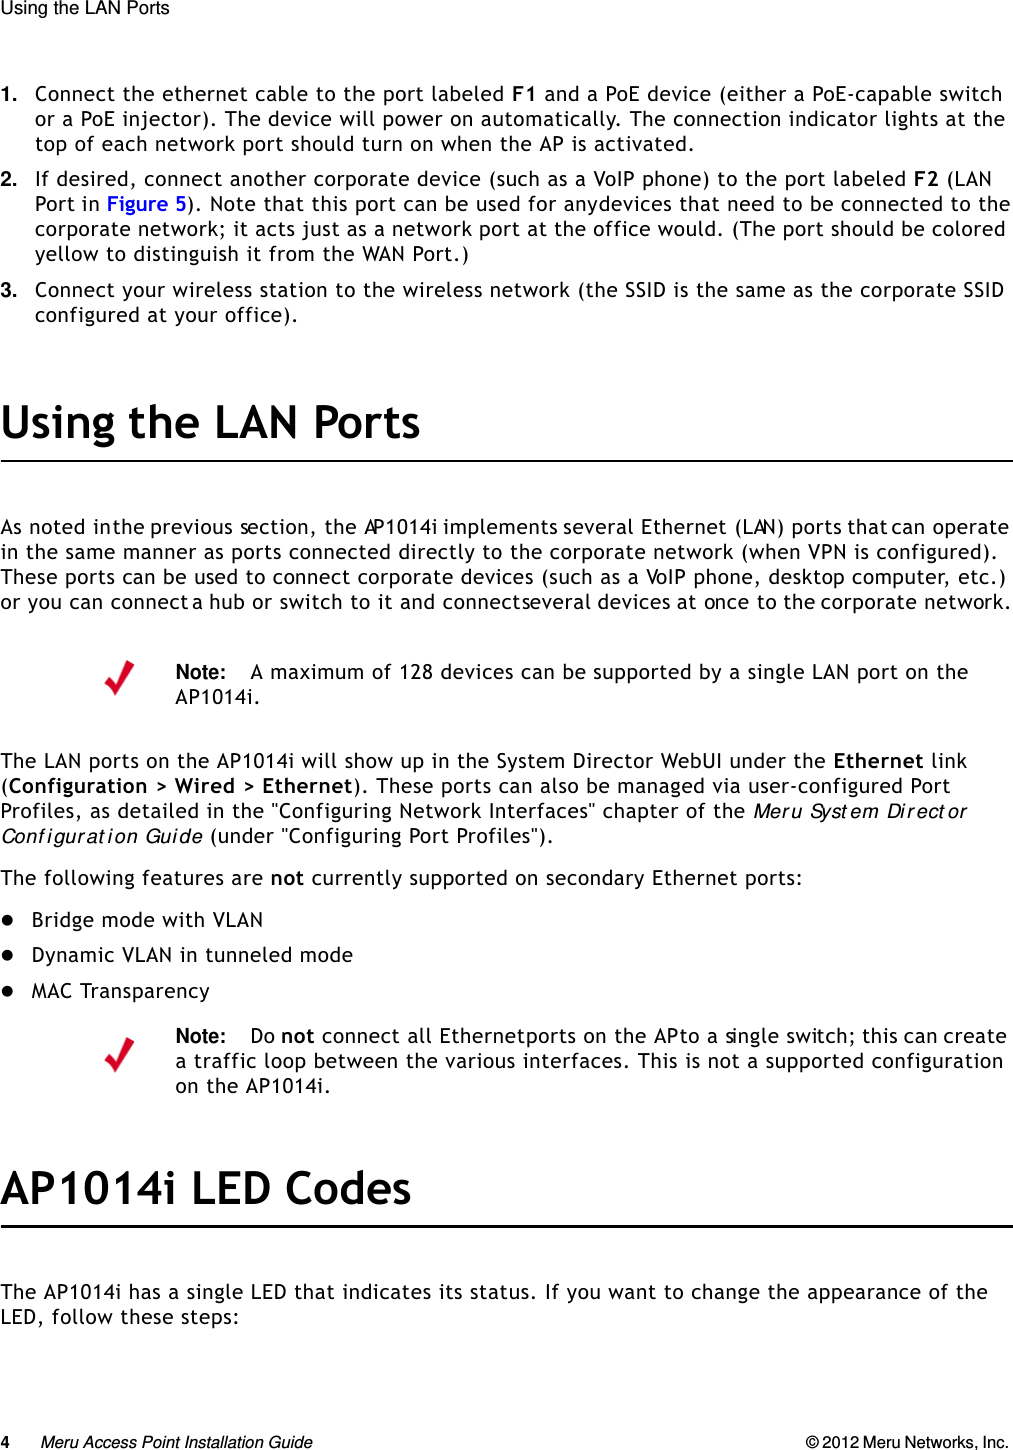 4Meru Access Point Installation Guide © 2012 Meru Networks, Inc. Using the LAN Ports 1. Connect the ethernet cable to the port labeled F1 and a PoE device (either a PoE-capable switch or a PoE injector). The device will power on automatically. The connection indicator lights at the top of each network port should turn on when the AP is activated.2. If desired, connect another corporate device (such as a VoIP phone) to the port labeled F2 (LAN Port in Figure 5). Note that this port can be used for any devices that need to be connected to the corporate network; it acts just as a network port at the office would. (The port should be colored yellow to distinguish it from the WAN Port.)3. Connect your wireless station to the wireless network (the SSID is the same as the corporate SSID configured at your office).Using the LAN PortsAs noted in the previous section, the AP1014i implements several Ethernet (LAN) ports that can operate in the same manner as ports connected directly to the corporate network (when VPN is configured). These ports can be used to connect corporate devices (such as a VoIP phone, desktop computer, etc.) or you can connect a hub or switch to it and connect several devices at once to the corporate network.The LAN ports on the AP1014i will show up in the System Director WebUI under the Ethernet link (Configuration &gt; Wired &gt; Ethernet). These ports can also be managed via user-configured Port Profiles, as detailed in the &quot;Configuring Network Interfaces&quot; chapter of the Meru Syst em Direct or Conf igurat ion Guide (under &quot;Configuring Port Profiles&quot;).The following features are not currently supported on secondary Ethernet ports:Bridge mode with VLANDynamic VLAN in tunneled modeMAC TransparencyAP1014i LED CodesThe AP1014i has a single LED that indicates its status. If you want to change the appearance of the LED, follow these steps:Note:A maximum of 128 devices can be supported by a single LAN port on the AP1014i.Note:Do not connect all Ethernet ports on the AP to a single switch; this can create a traffic loop between the various interfaces. This is not a supported configuration on the AP1014i.